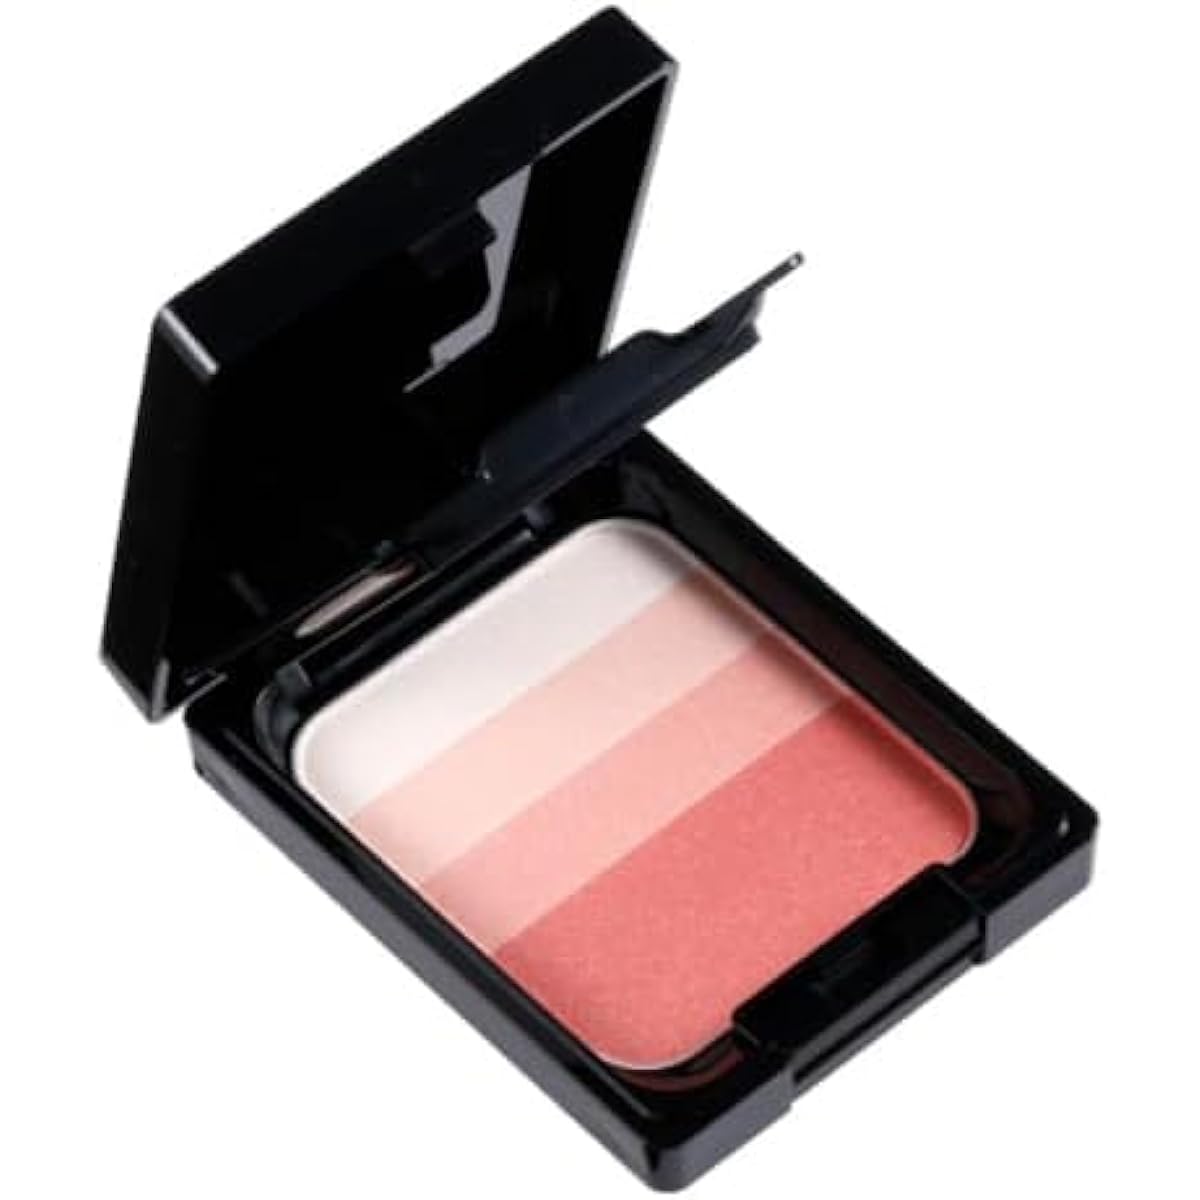 TAKAKOOHASHI Designing Face Color EX [Peach Red] 12g Cheek Highlight Contains Beauty Ingredients Takako Ohashi